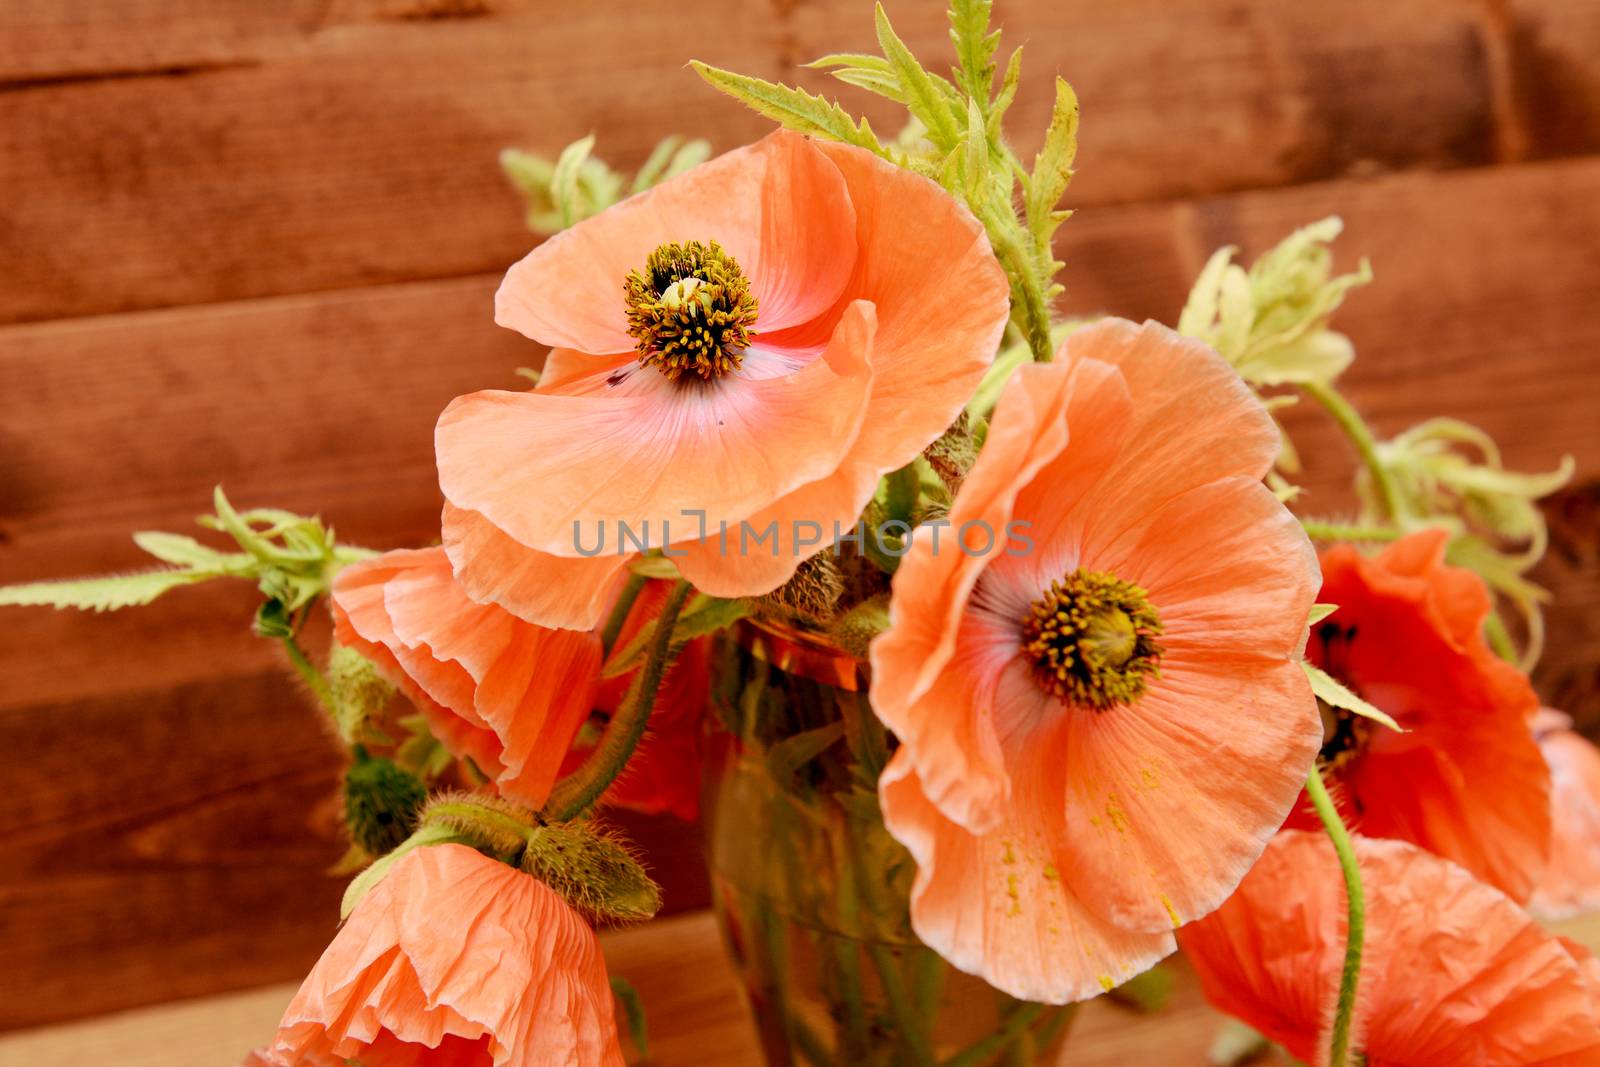 Pale pink poppies picked from the garden by sarahdoow